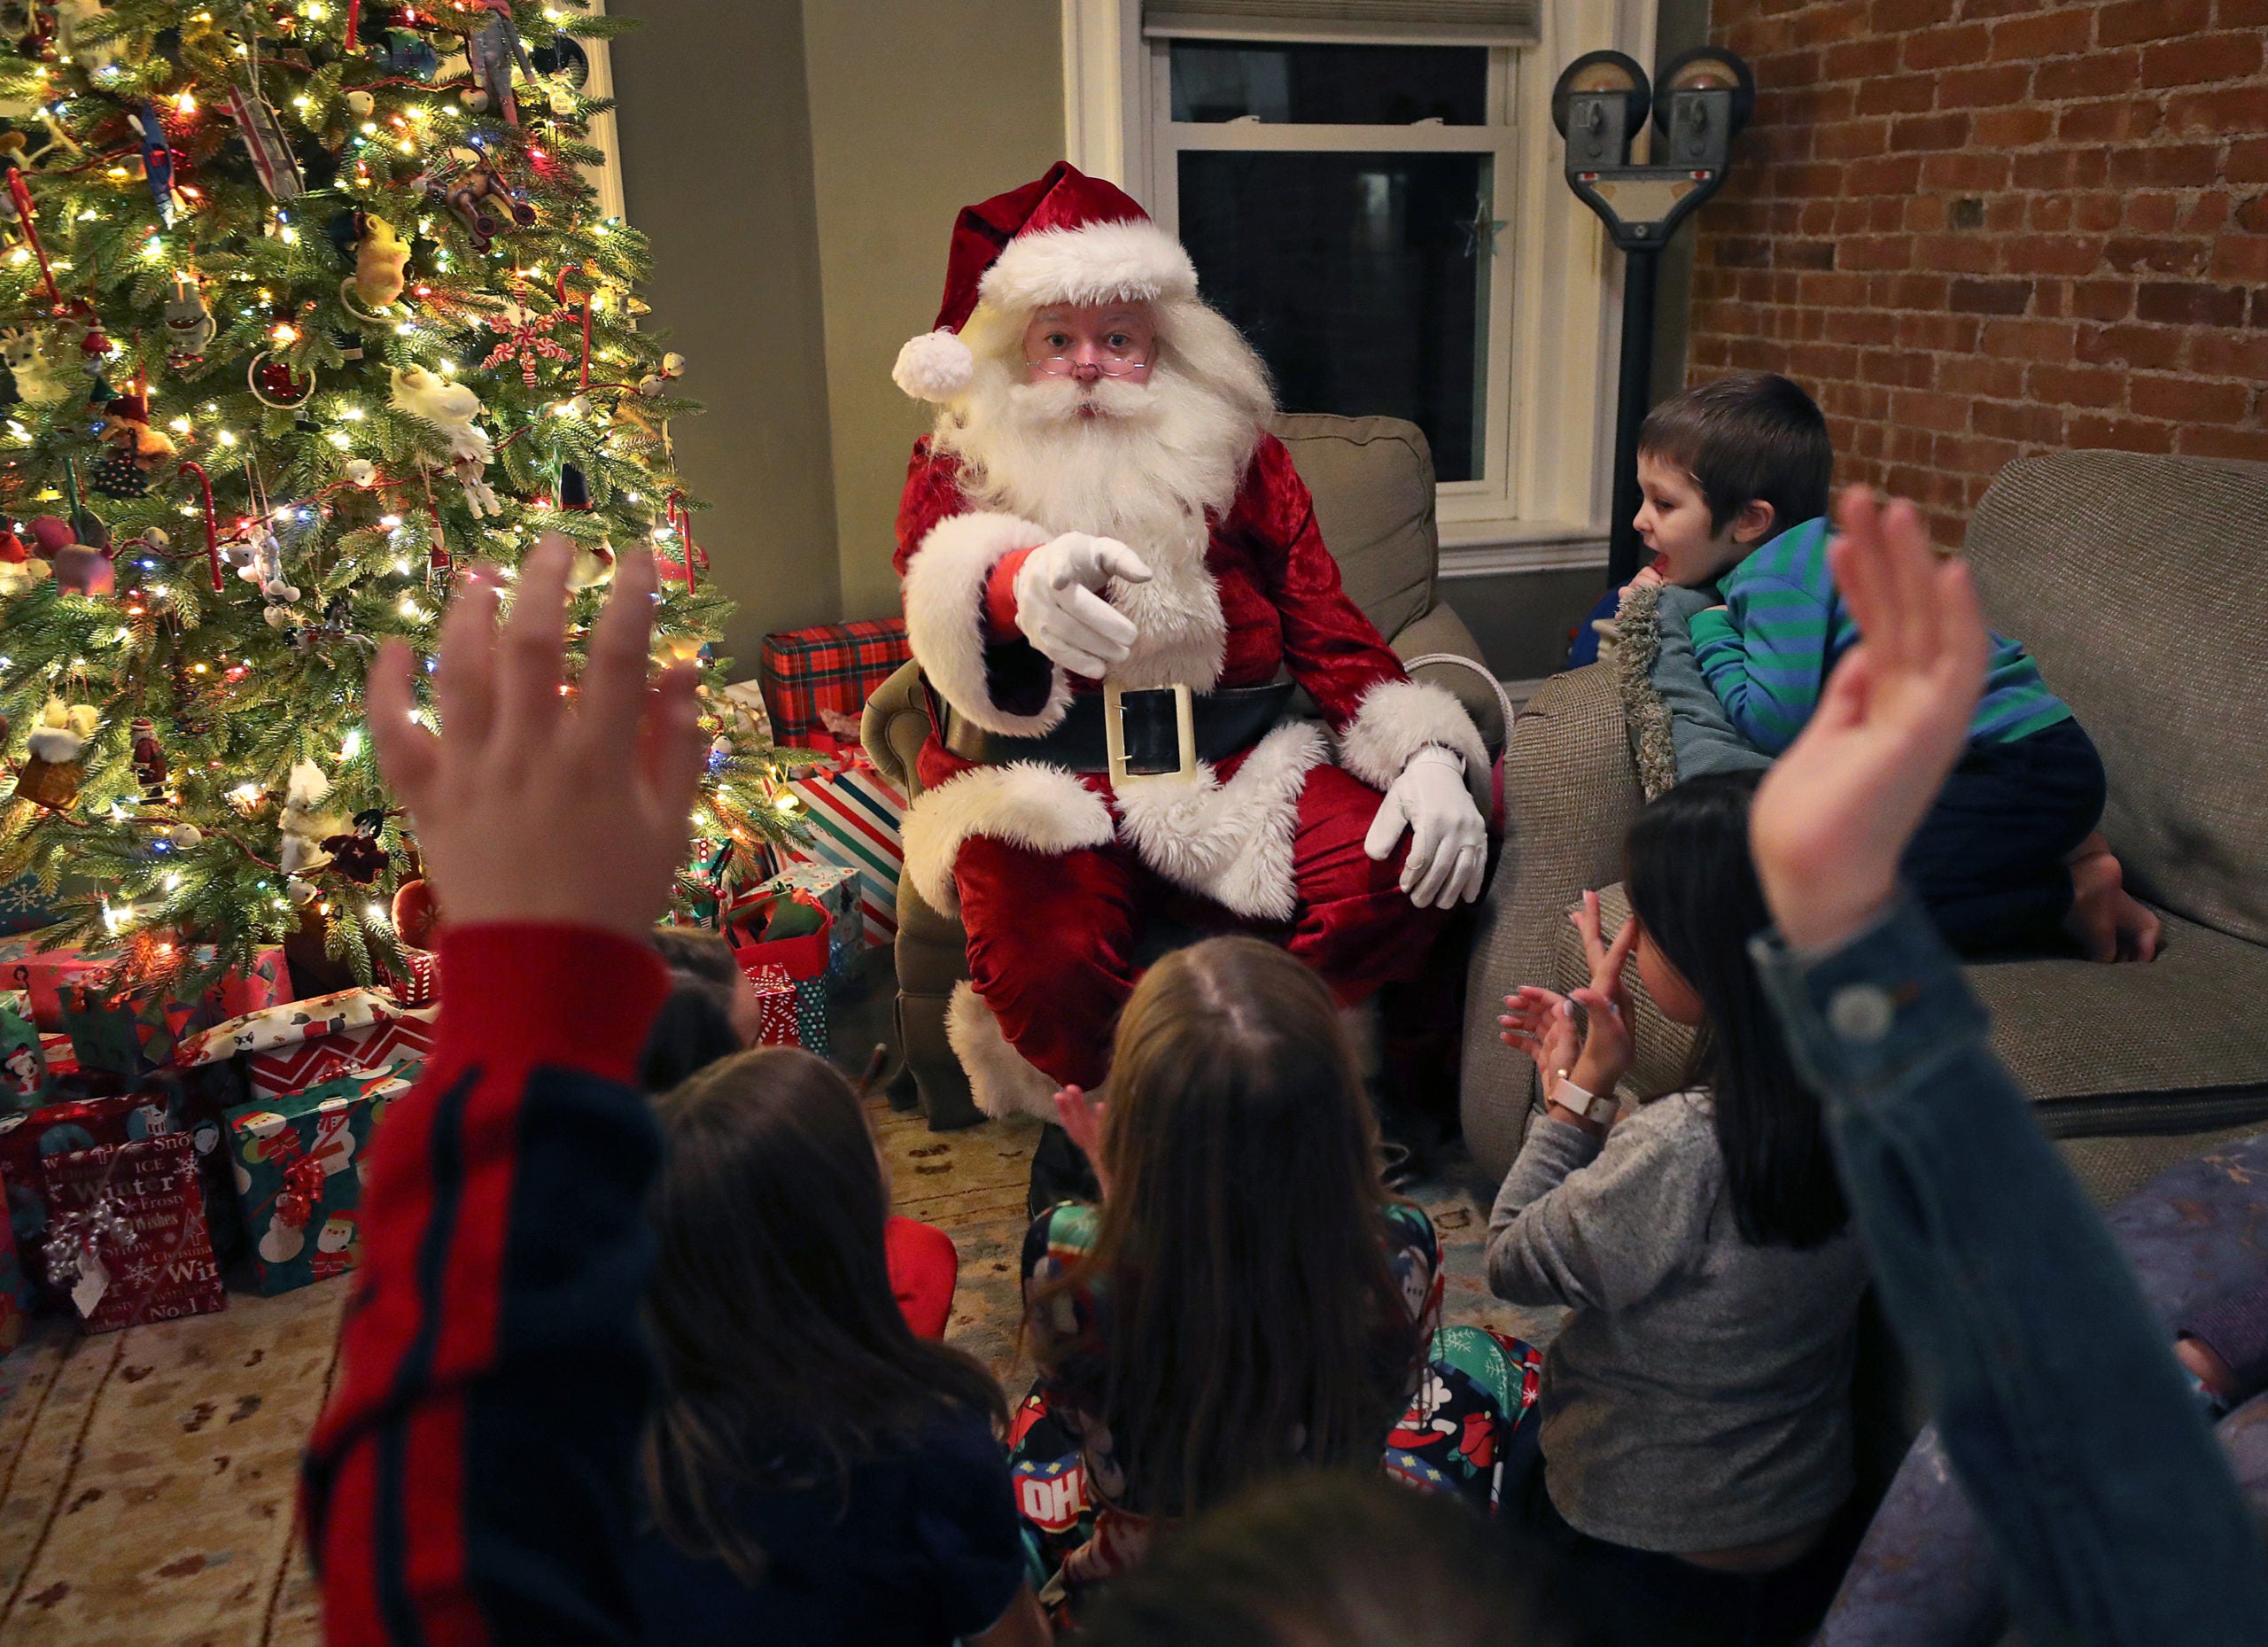 Meet the most expensive Santa in Boston. He charges 700 an hour.